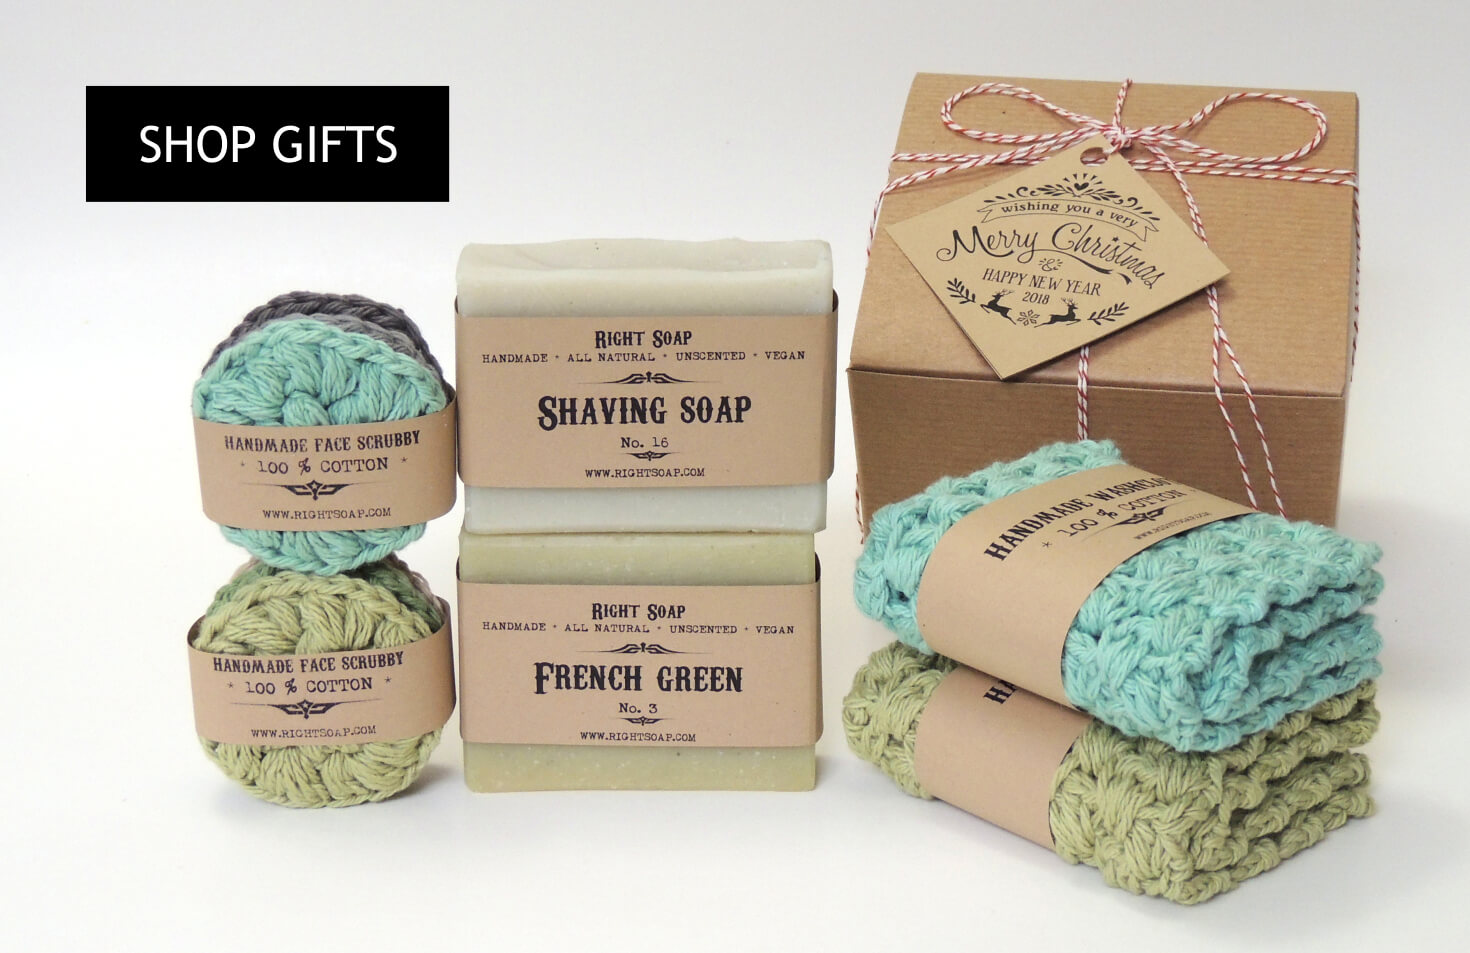 SHOP GIFTS RIGHT SOAP gift box